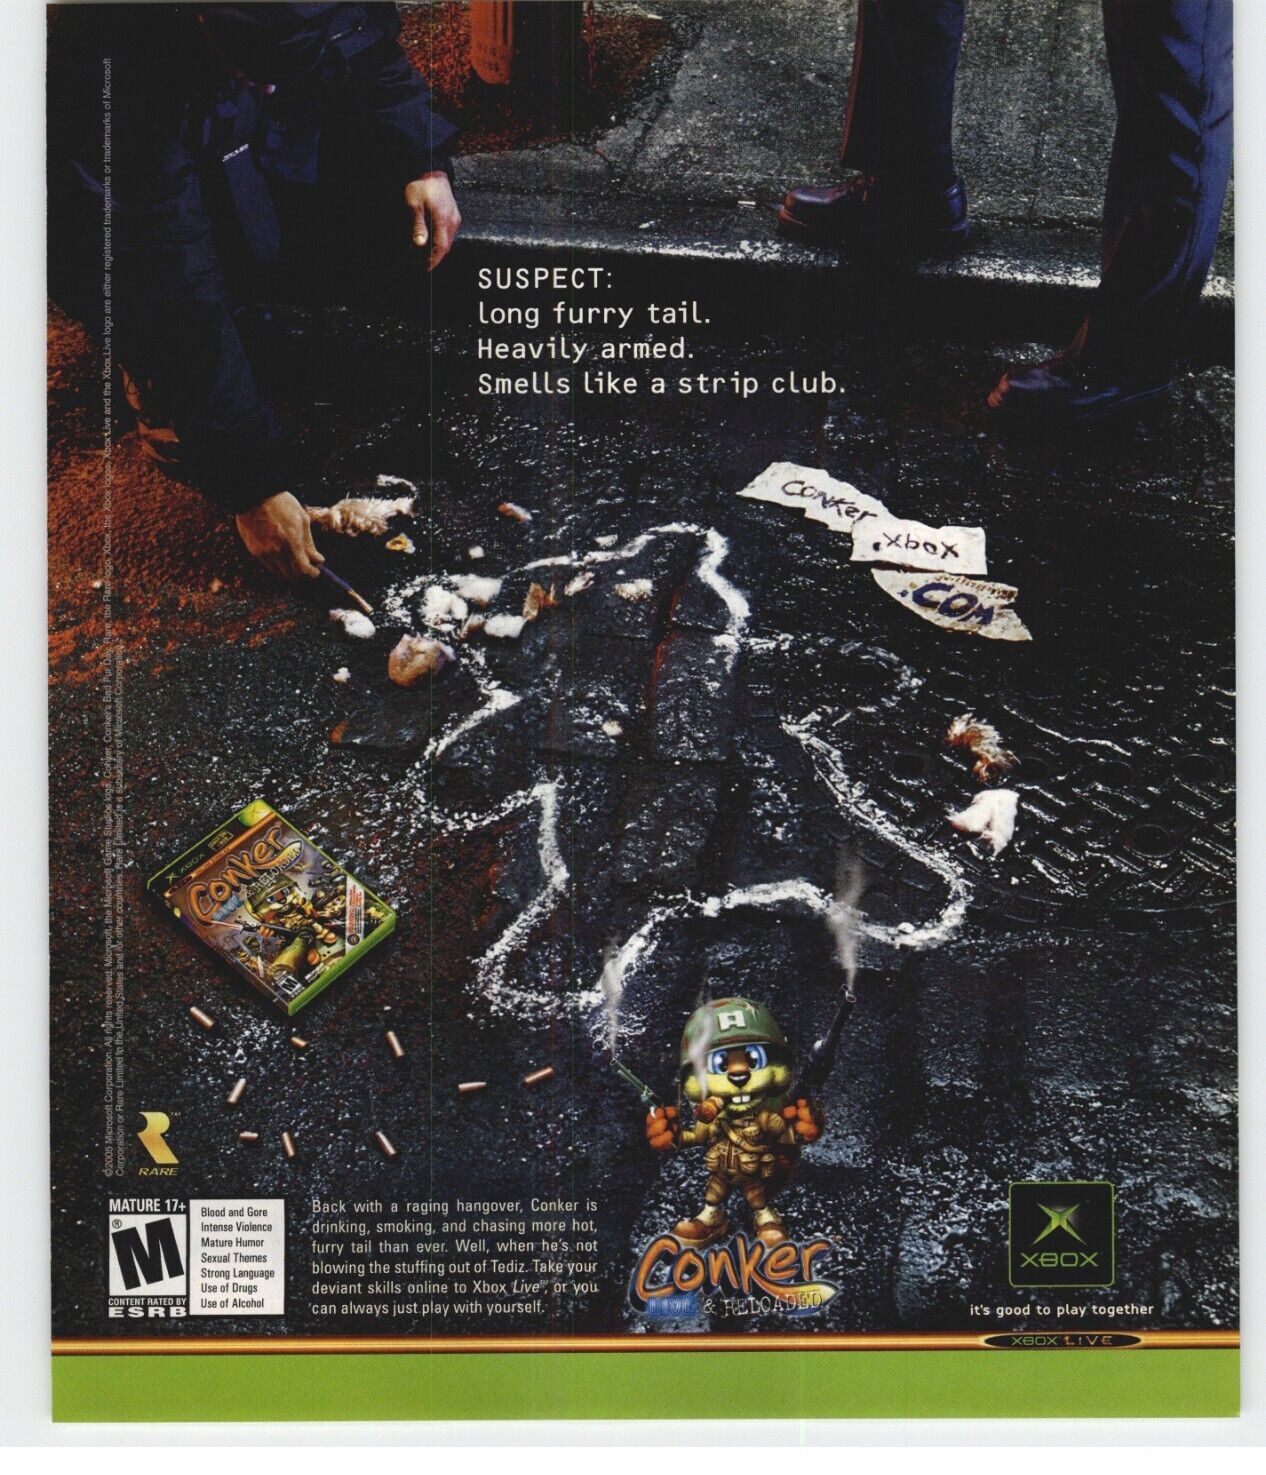 2005 Conker: Live & Reloaded Xbox Print Ad/Poster Official Promo Art Bad Fur Day